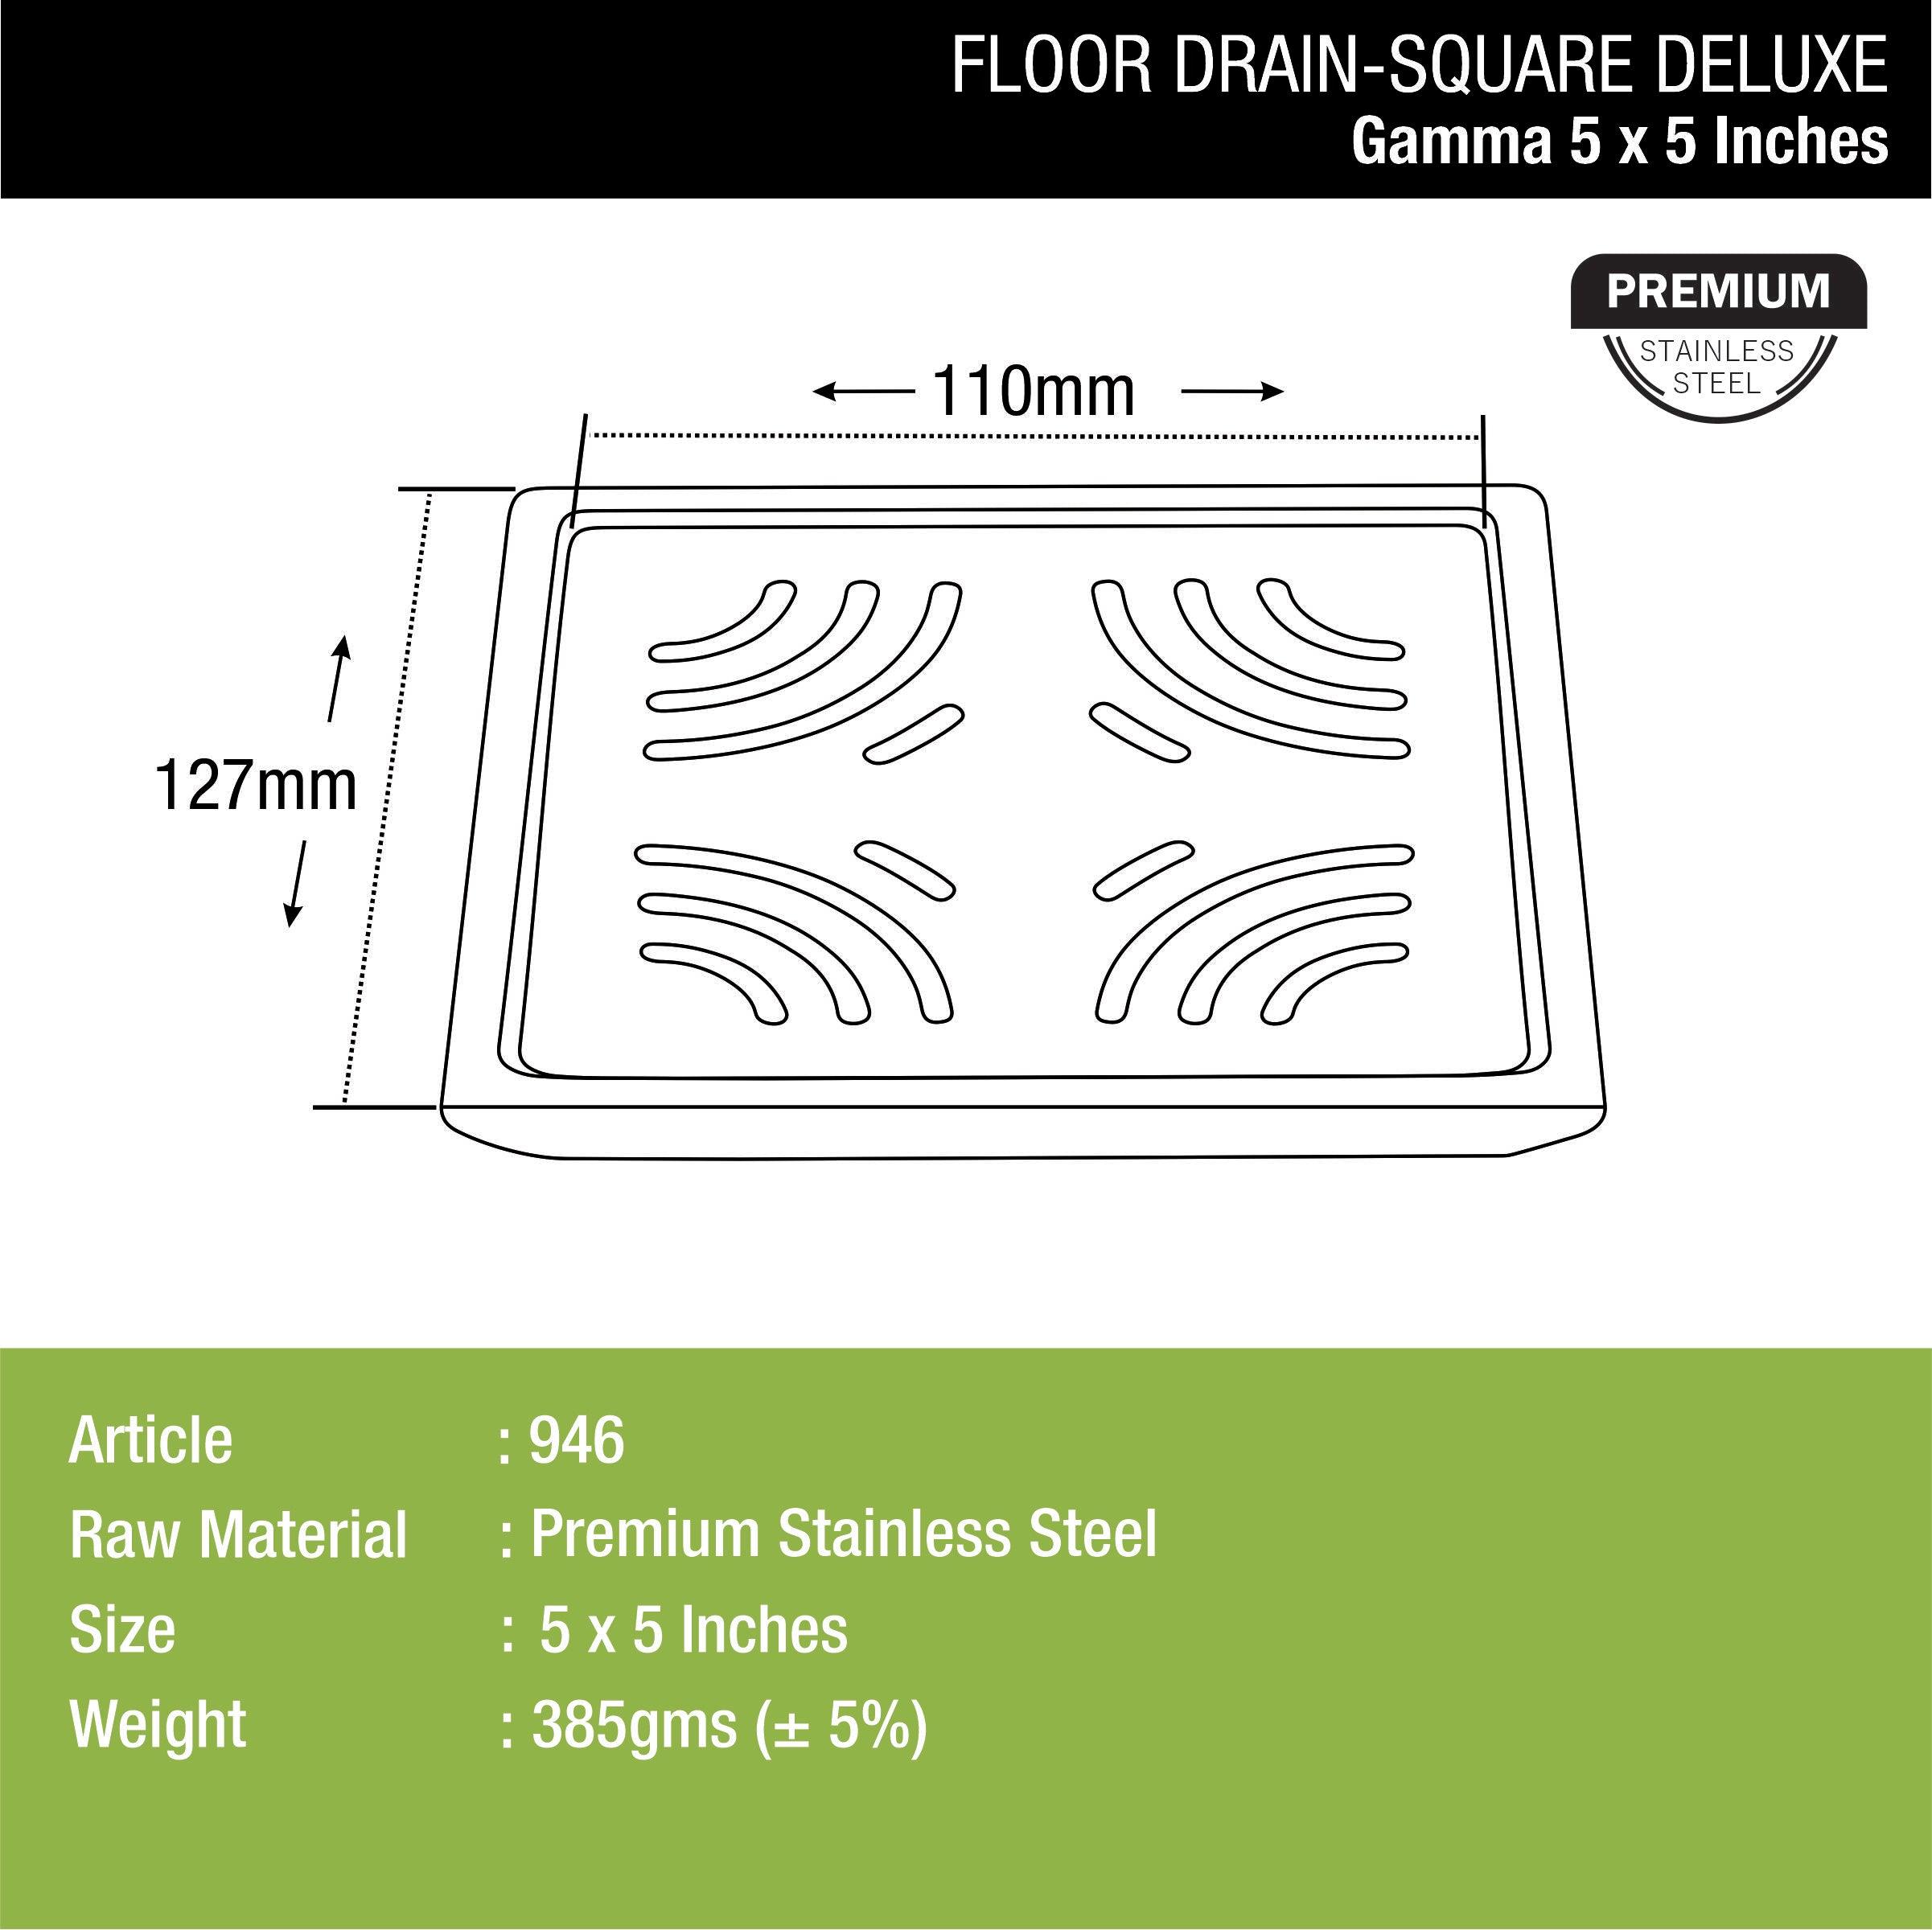 Gamma Deluxe Square Floor Drain (5 x 5 Inches) dimensions and sizes